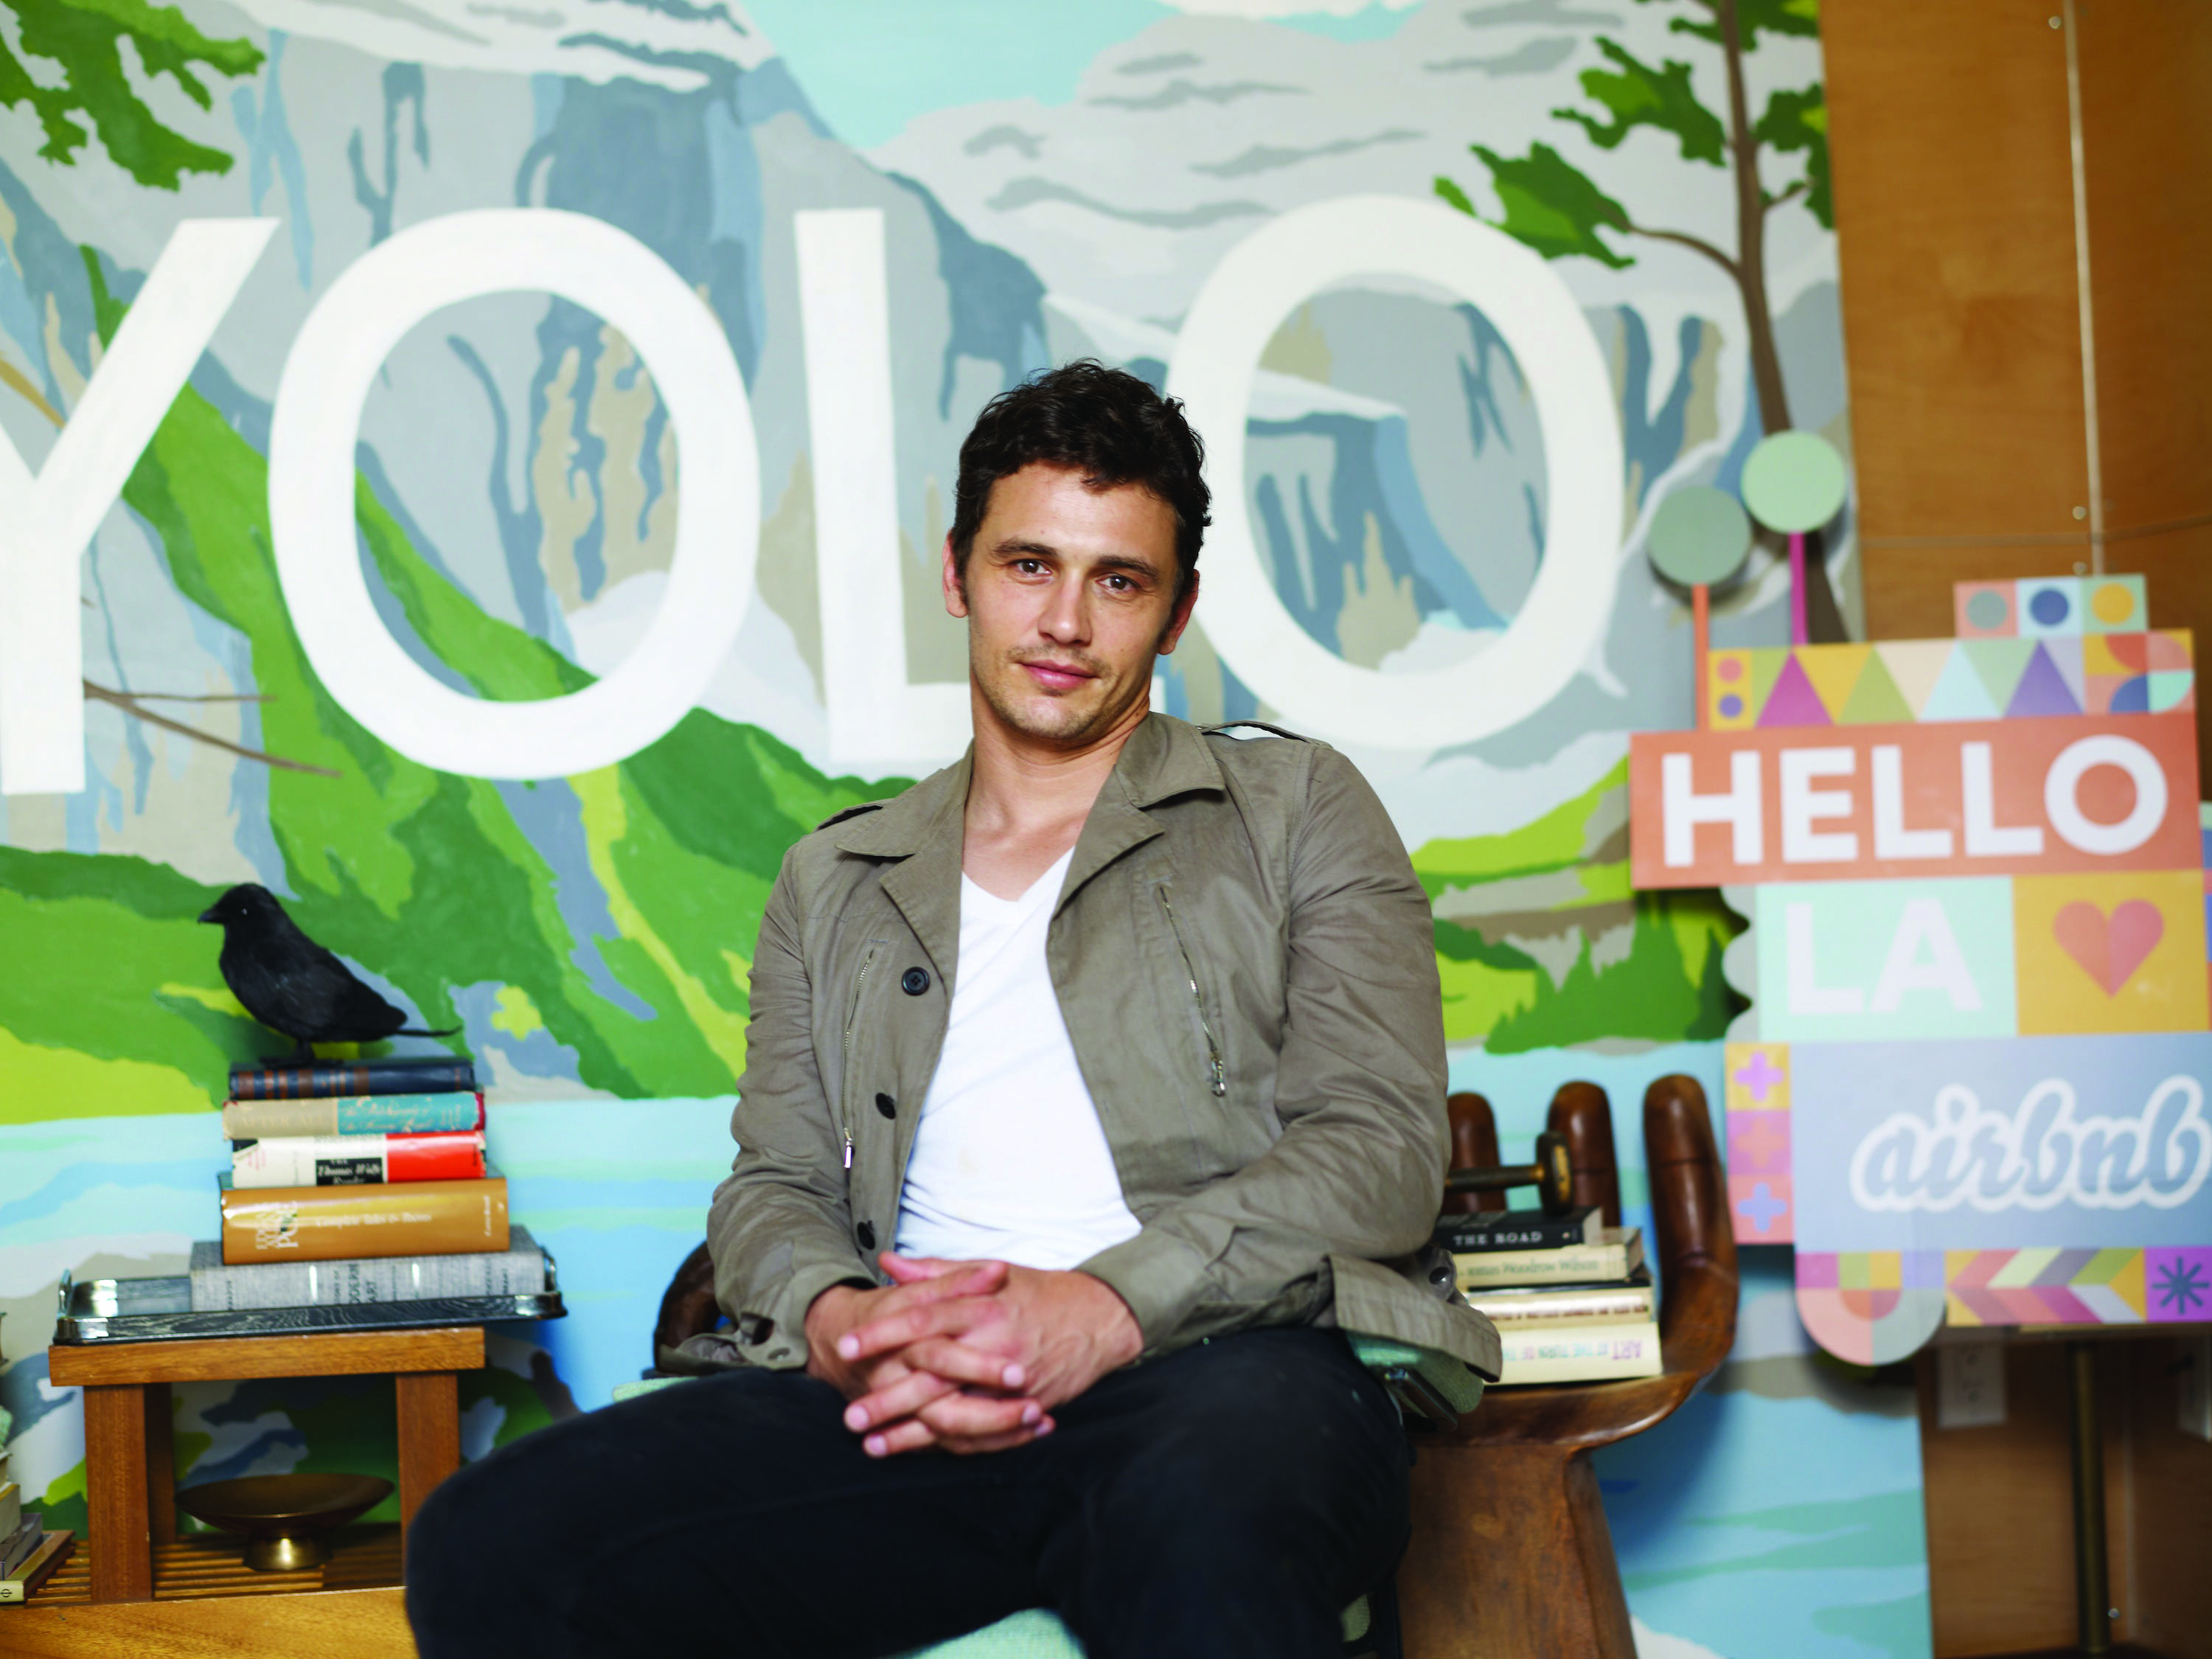 JamesFranco, credit Getty Images for Airbnb